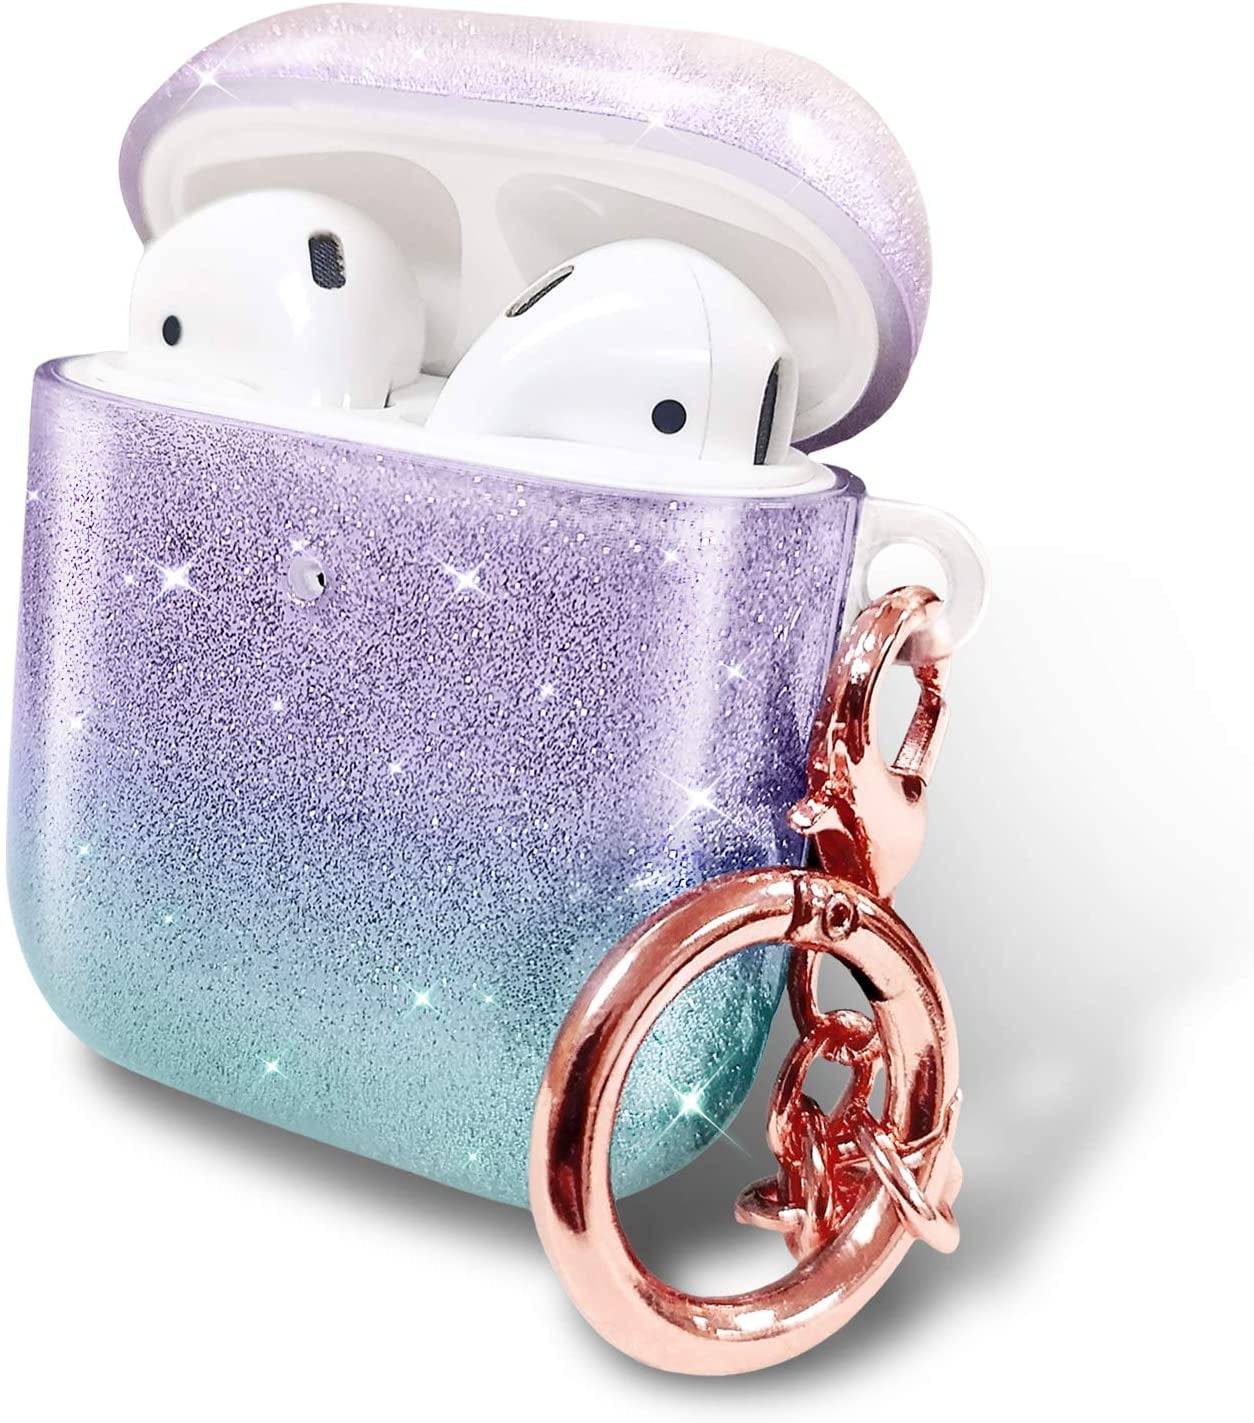 AirPods Pro Pearl Glitter Case Skin with keychain Compatible for AirPods 1 & 2,Shockproof Earbuds Case Cover Skin Leopard AirPod Case